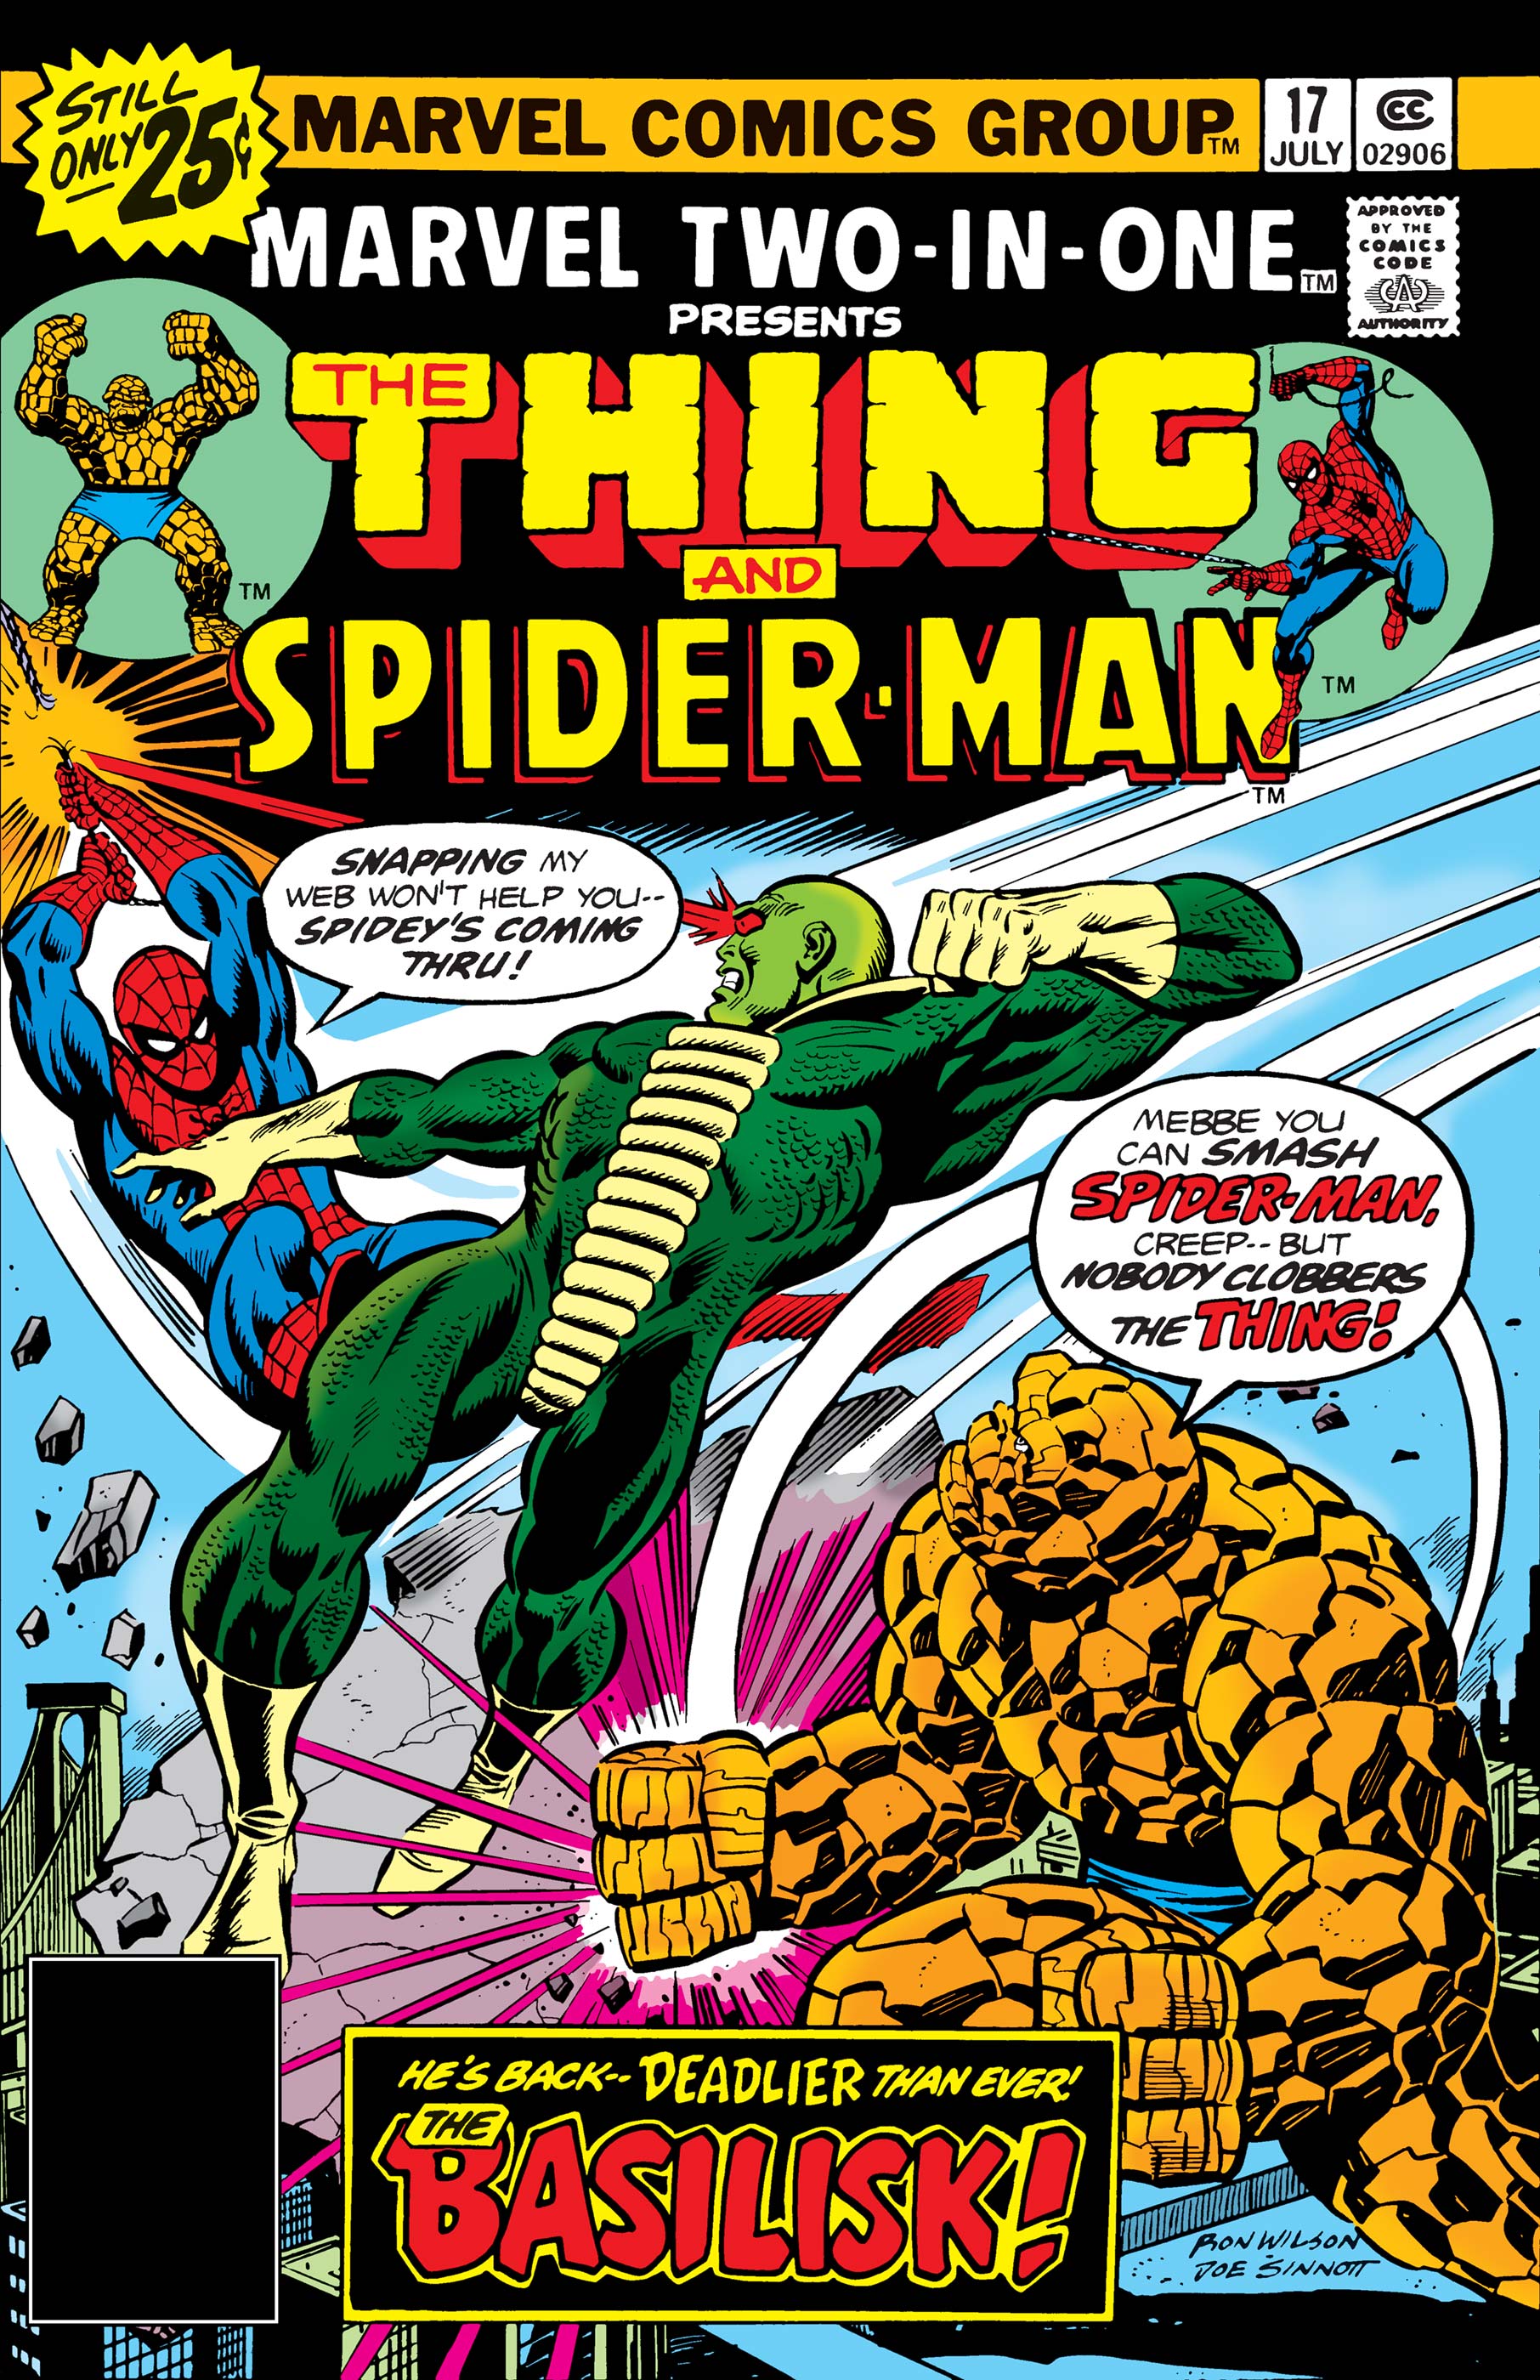 Marvel Two-in-One (1974) #17